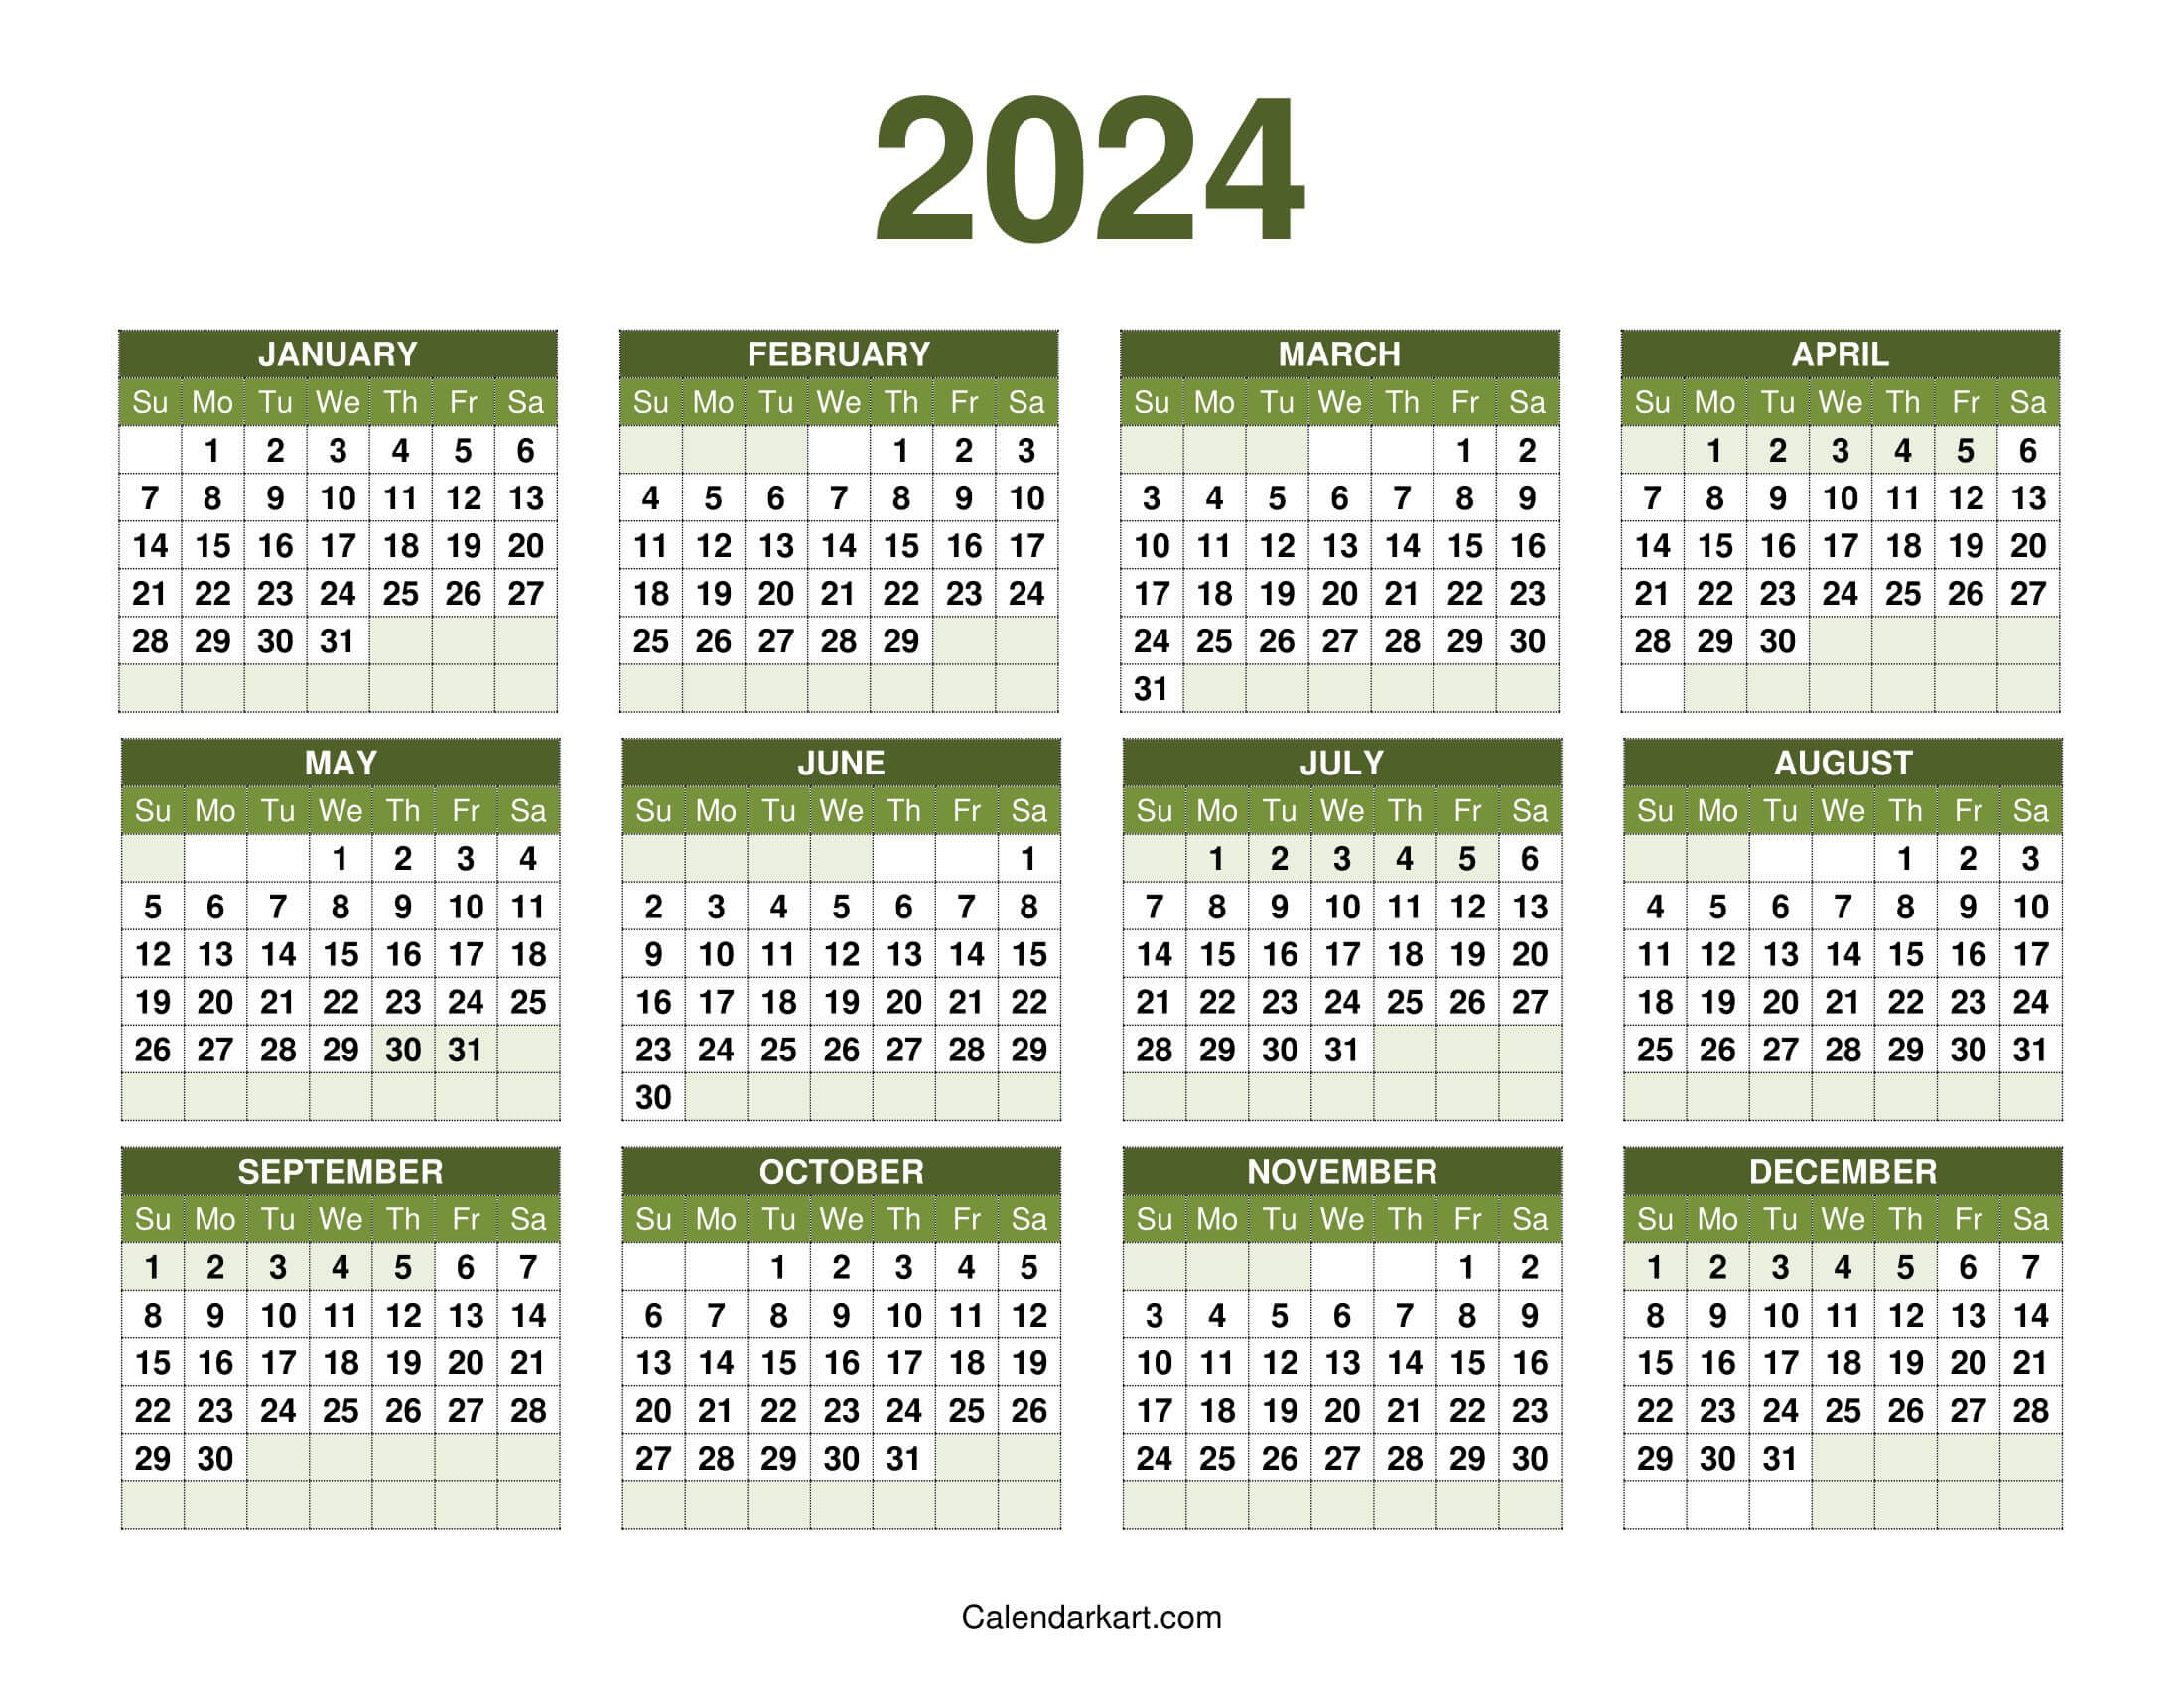 Free Printable Year At A Glance Calendar 2023-2024 - Calendarkart | Printable 2024 Calendars Without Installing